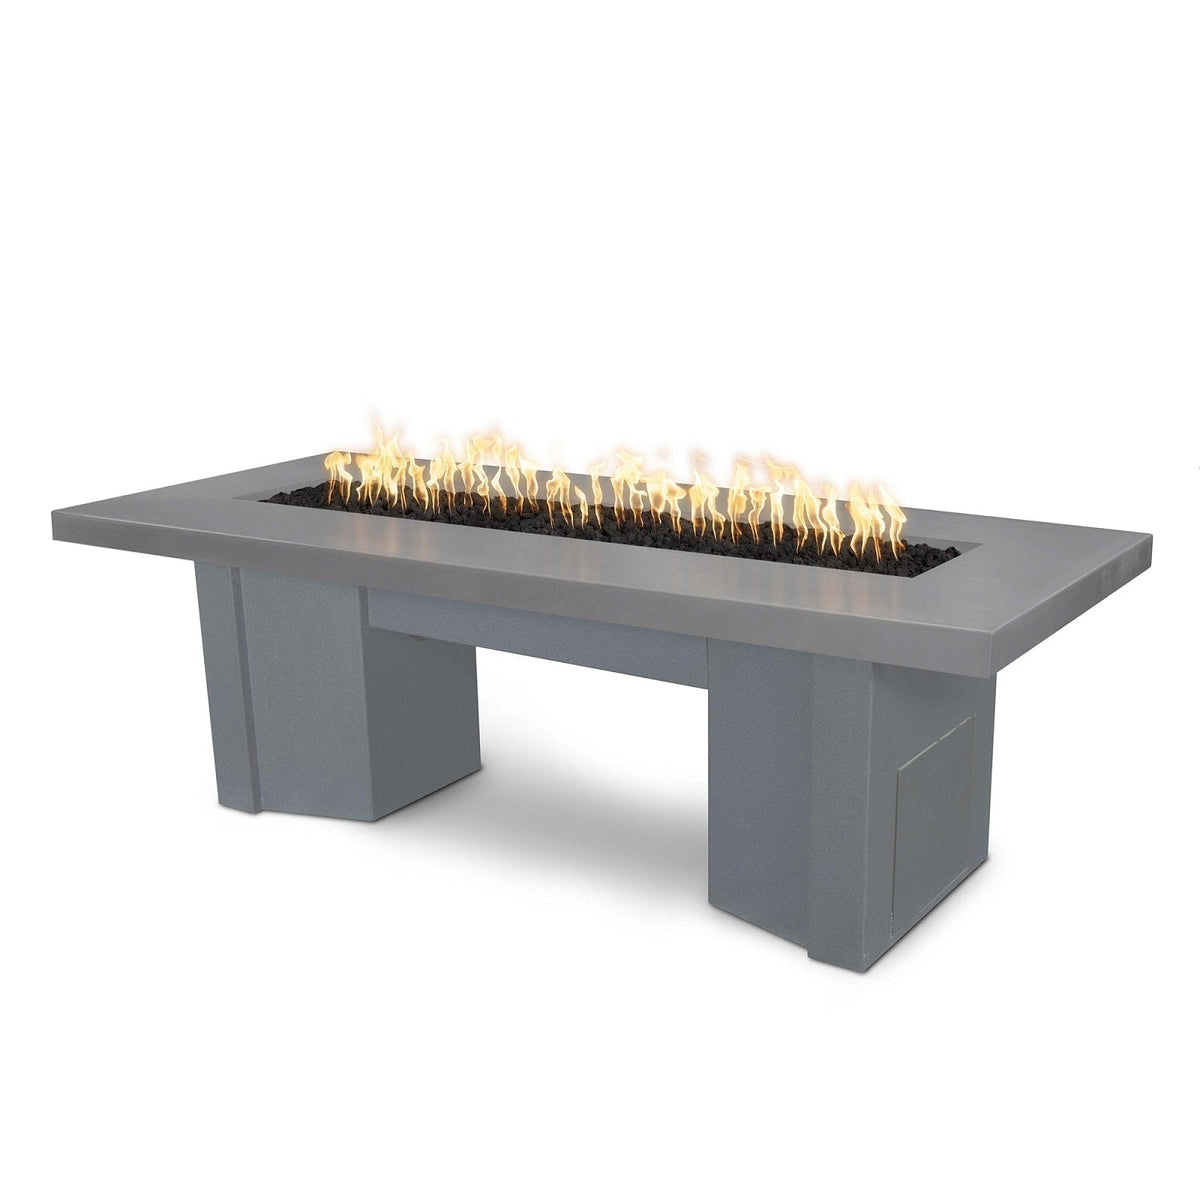 The Outdoor Plus Fire Features Natural Gray (-NGY) / Gray Powder Coated Steel (-GRY) The Outdoor Plus 78&quot; Alameda Fire Table Smooth Concrete in Liquid Propane - 12V Electronic Ignition / OPT-ALMGFRC78E12V-LP